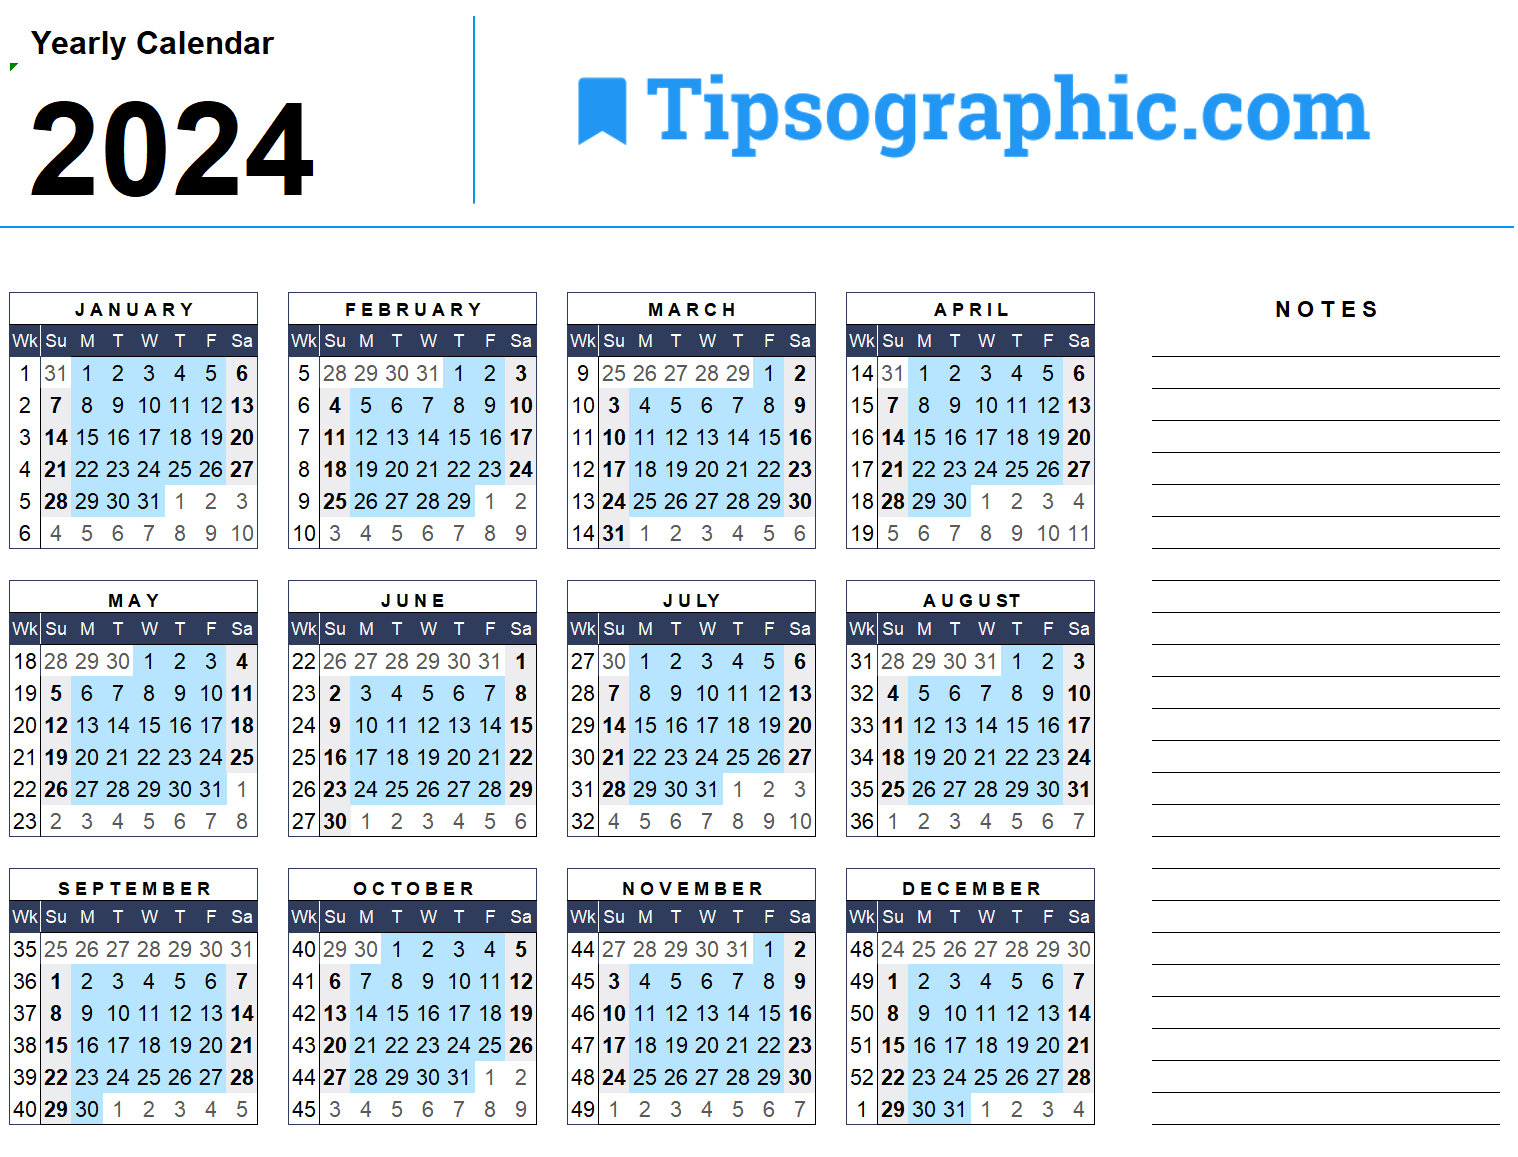 2024 Calendar Templates Images Tipsographic 3 